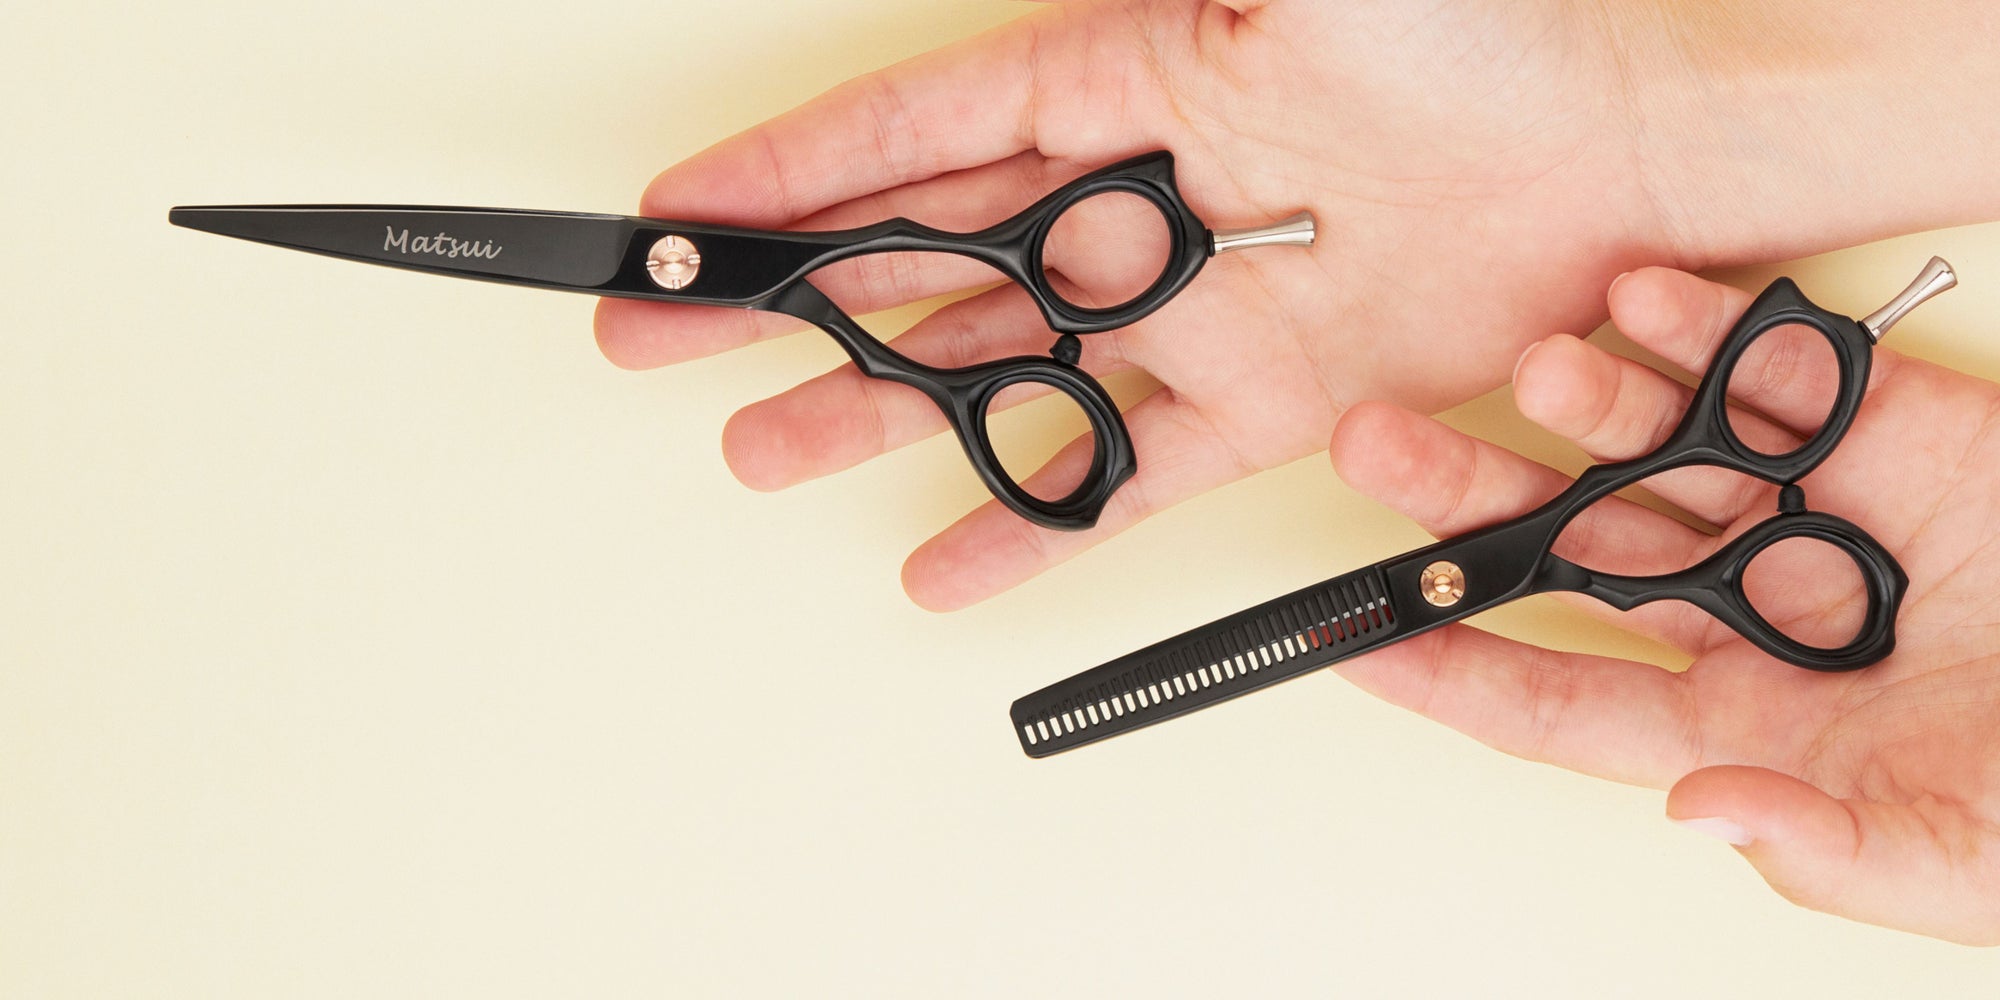 What Every Hairstyling Professional Should Know About Hair Shears?